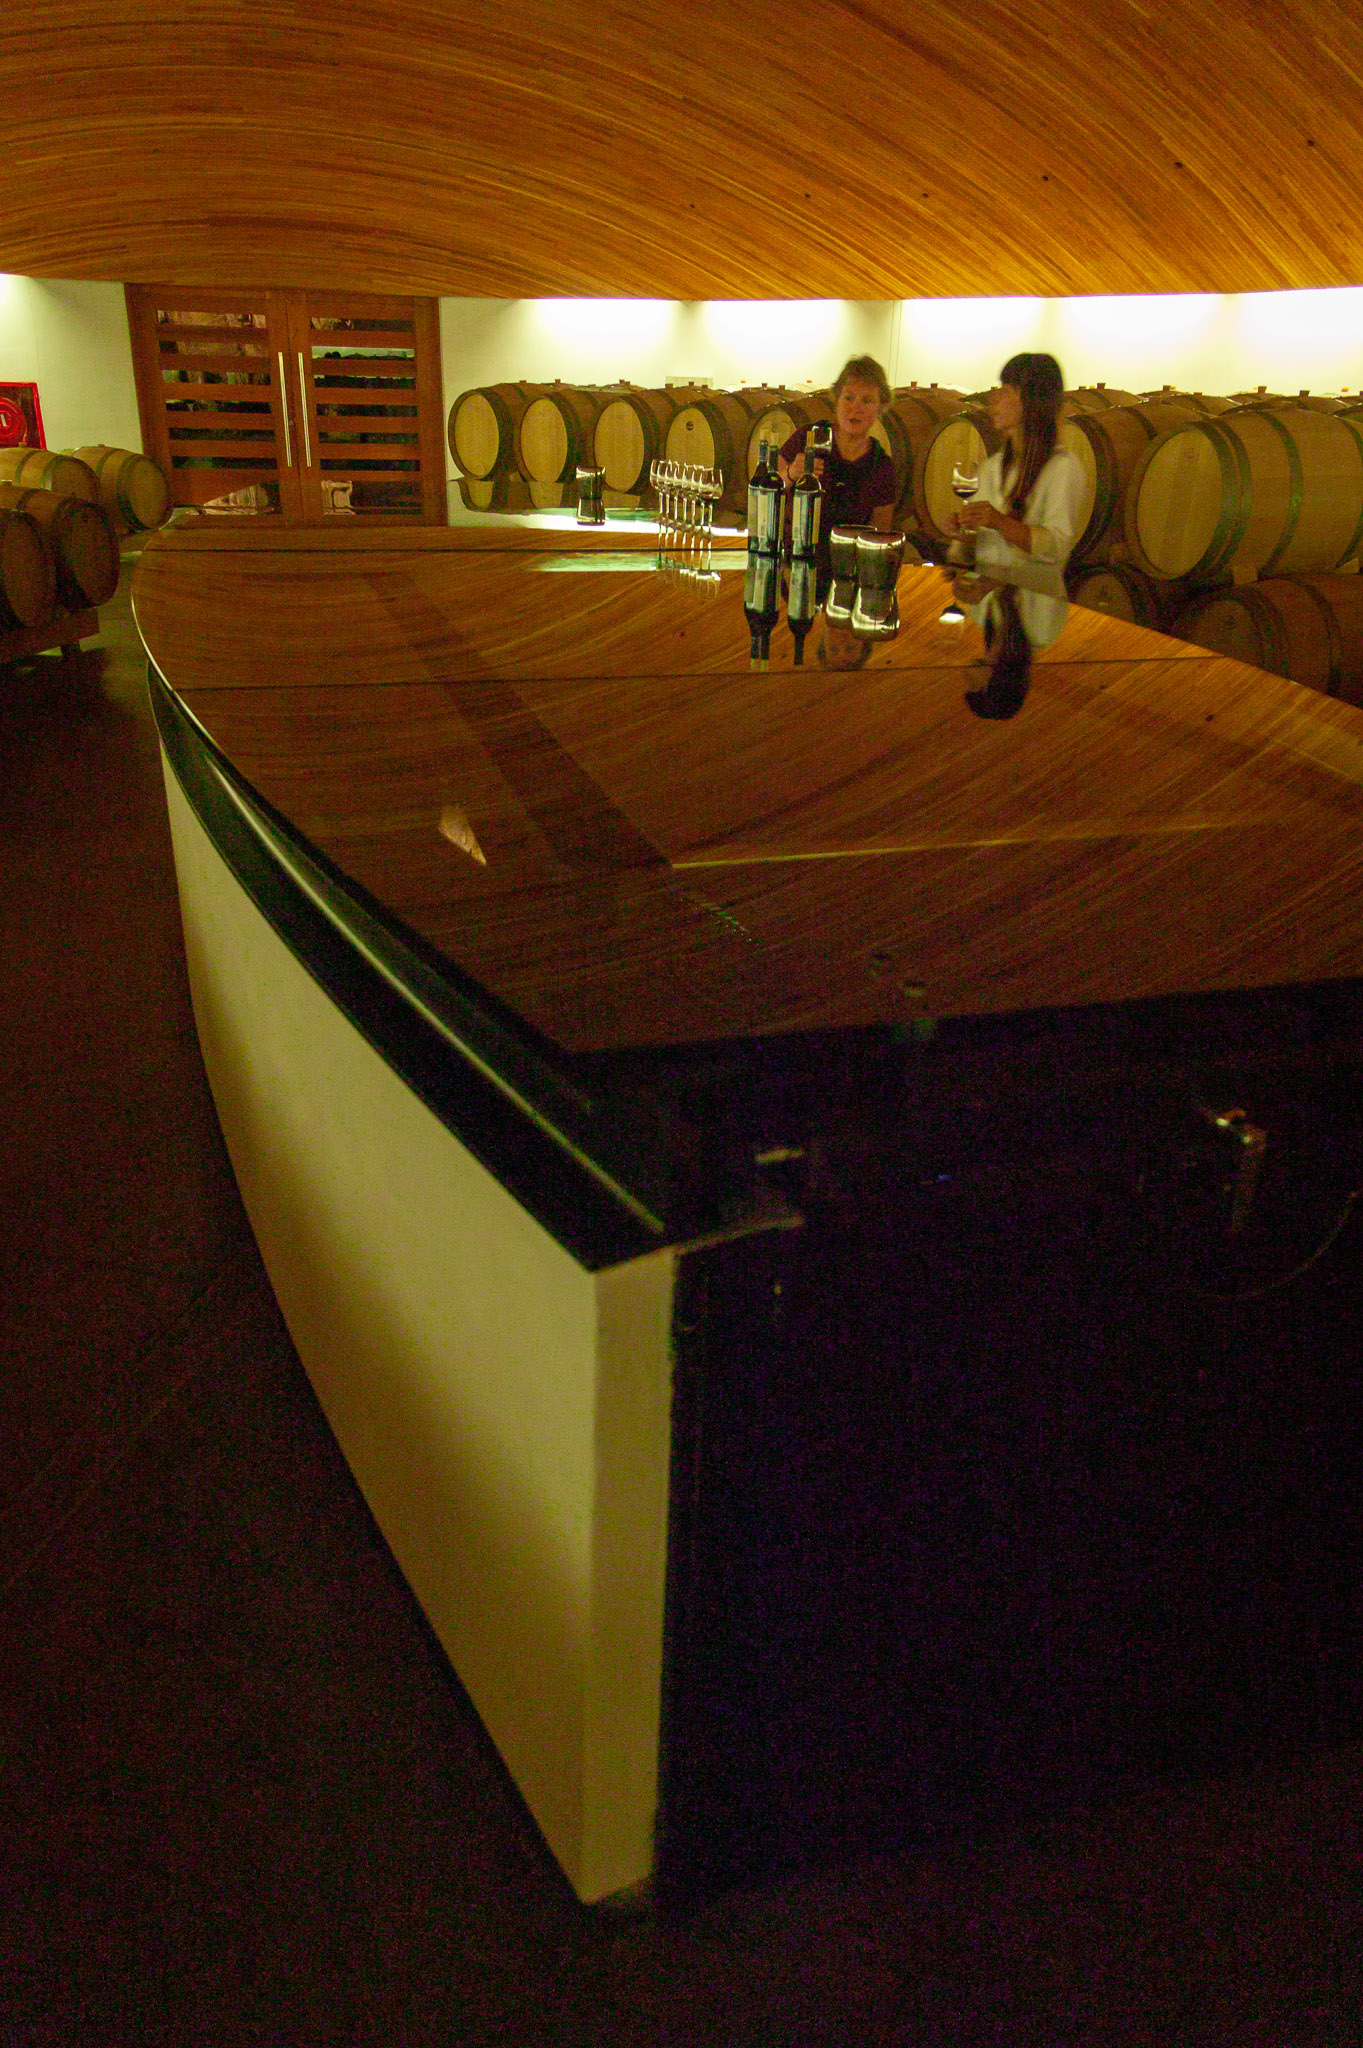 Under elipical glass table is staircase to lower private wine cellar (2 levels) at Clos Apalta